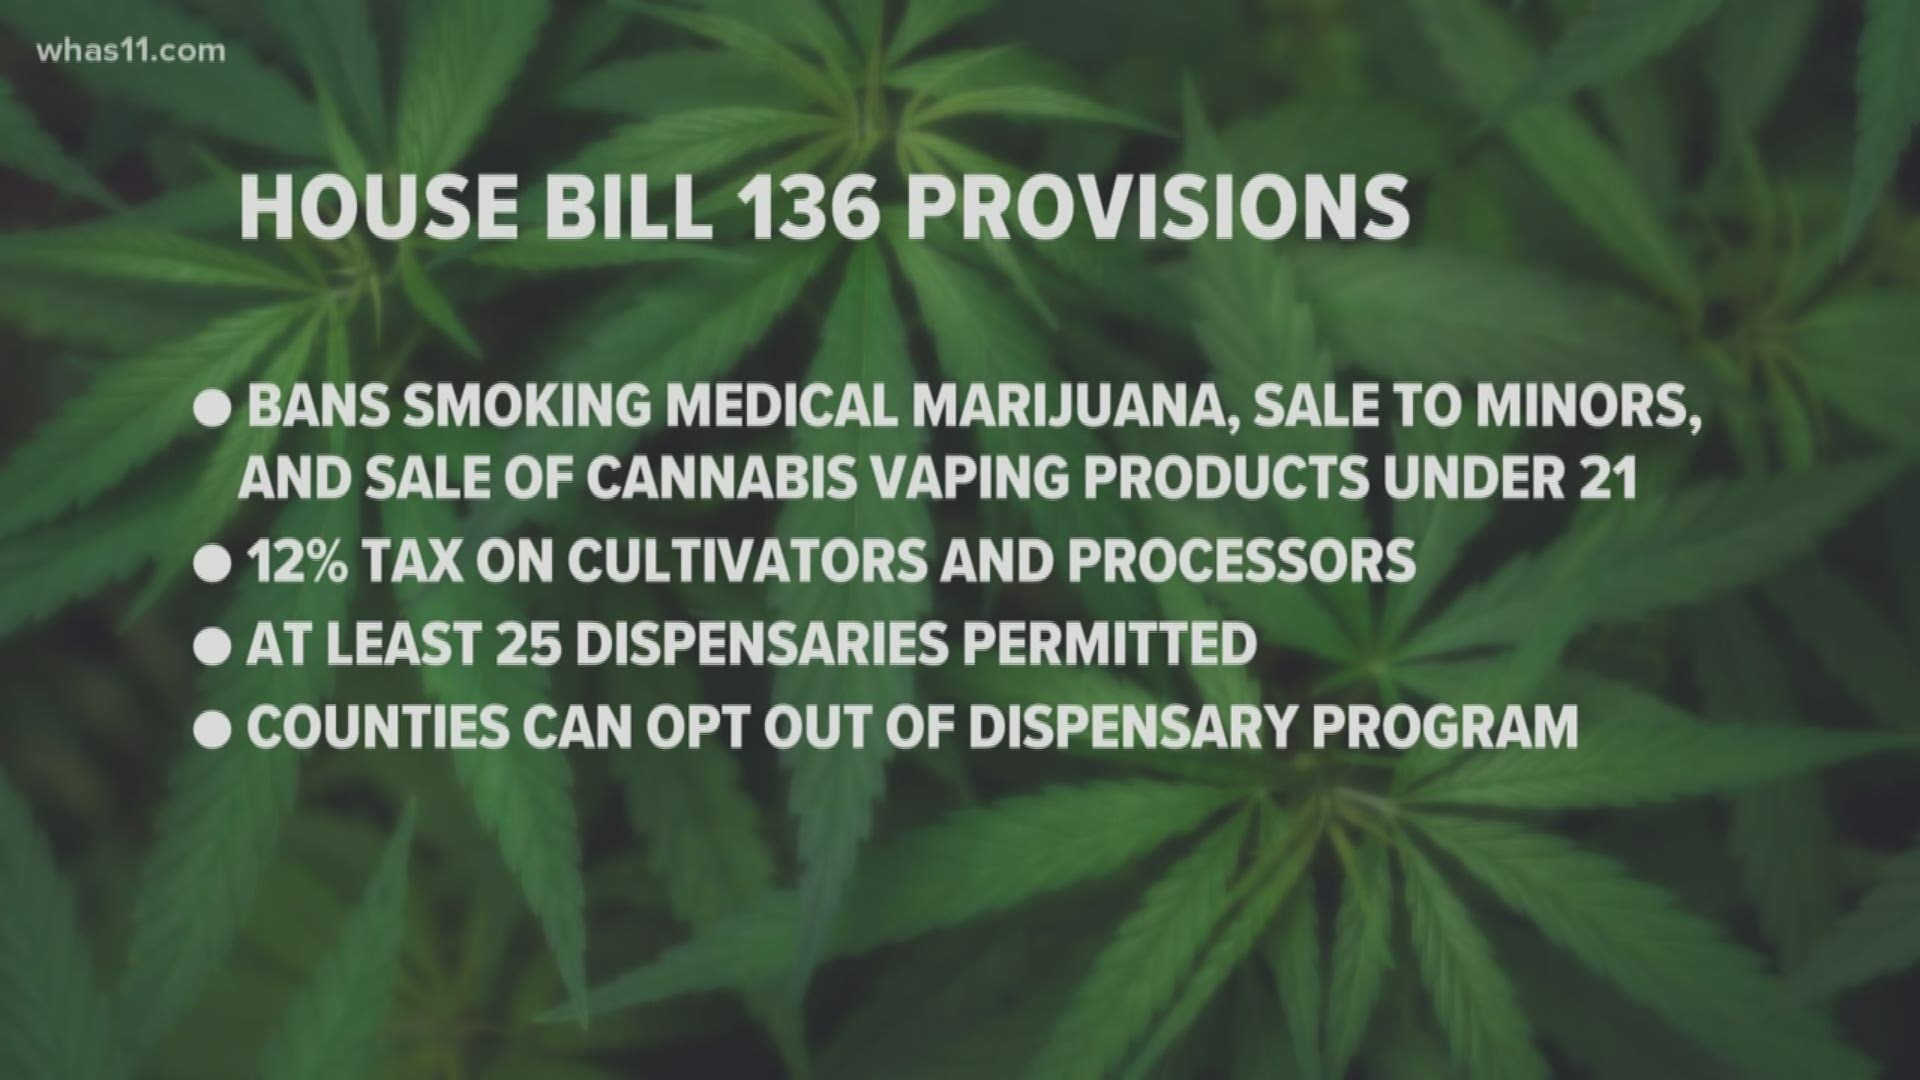 Kentucky's medical marijuana bill faces an uncertain future after that historic House vote.